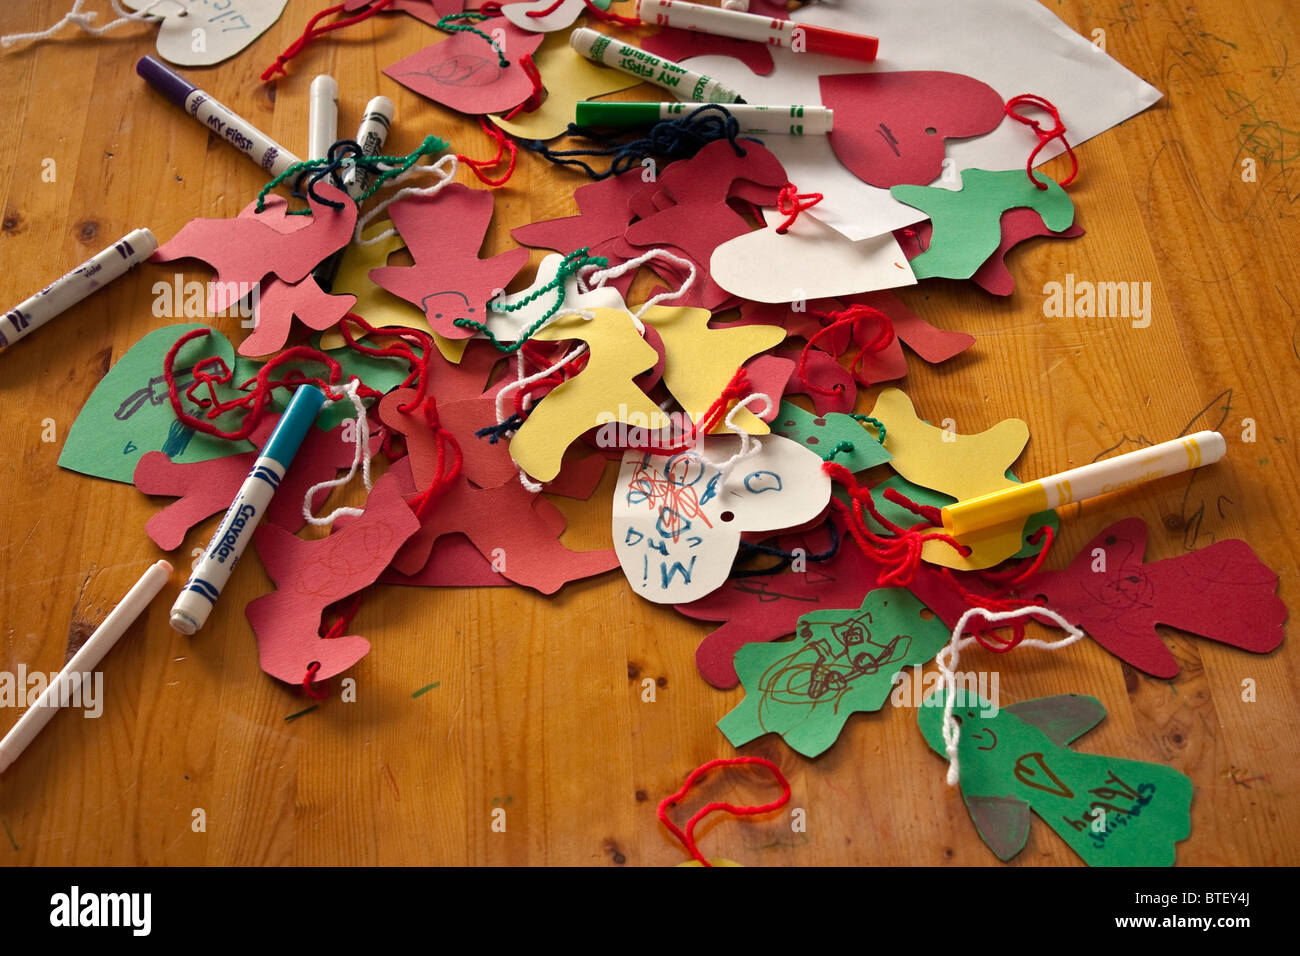 Hand-made paper craft decorations, hearts and shapes Stock Photo